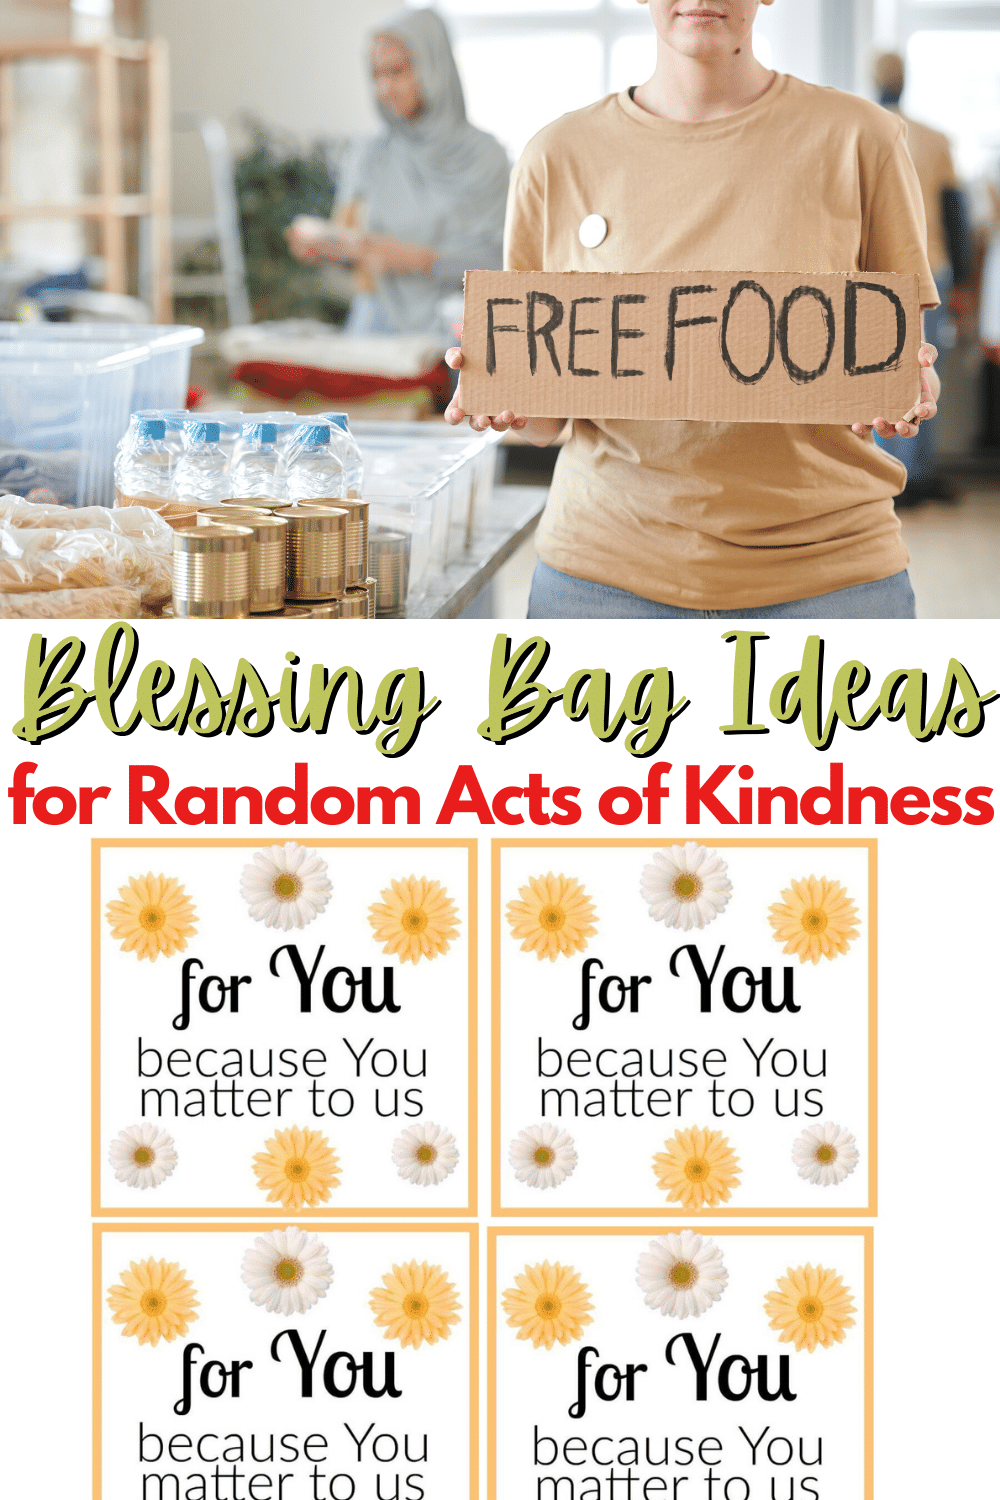 Making care packages using these simple blessing bag ideas is a wonderful random act of kindness idea to teach children to care for others. #randomactsofkindness #kindness #parentingtip #blessingbag via @wondermomwannab